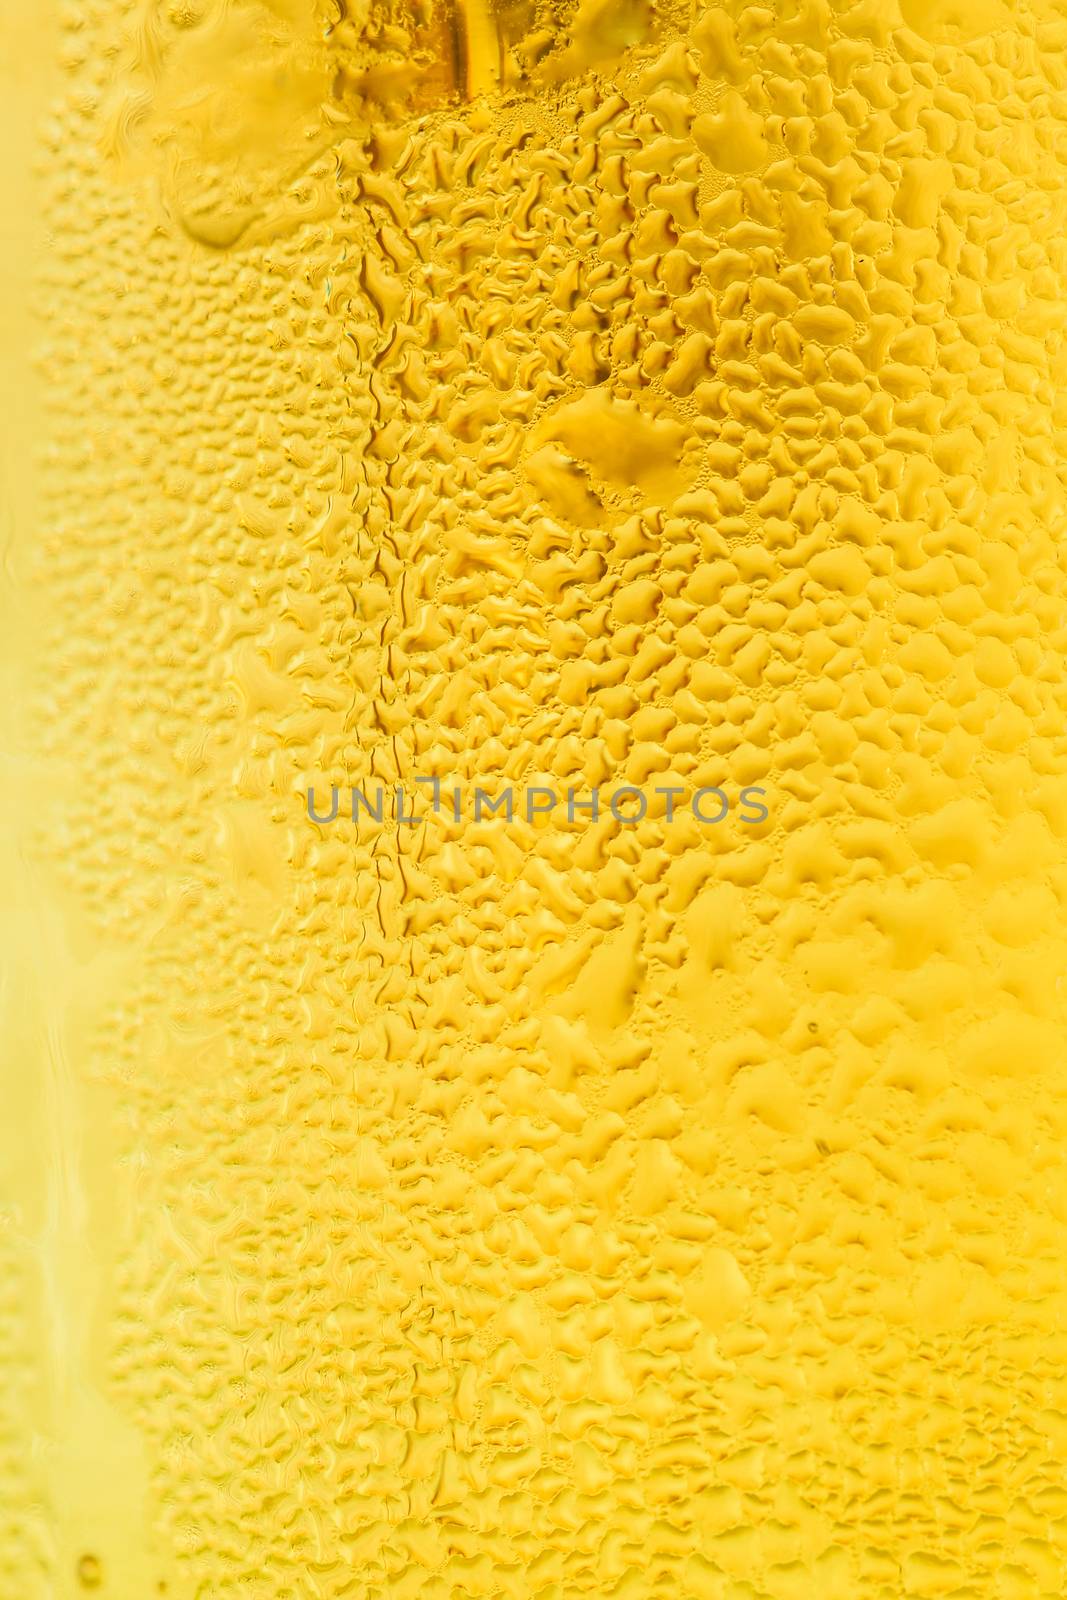 misted glass of cold drink, close-up